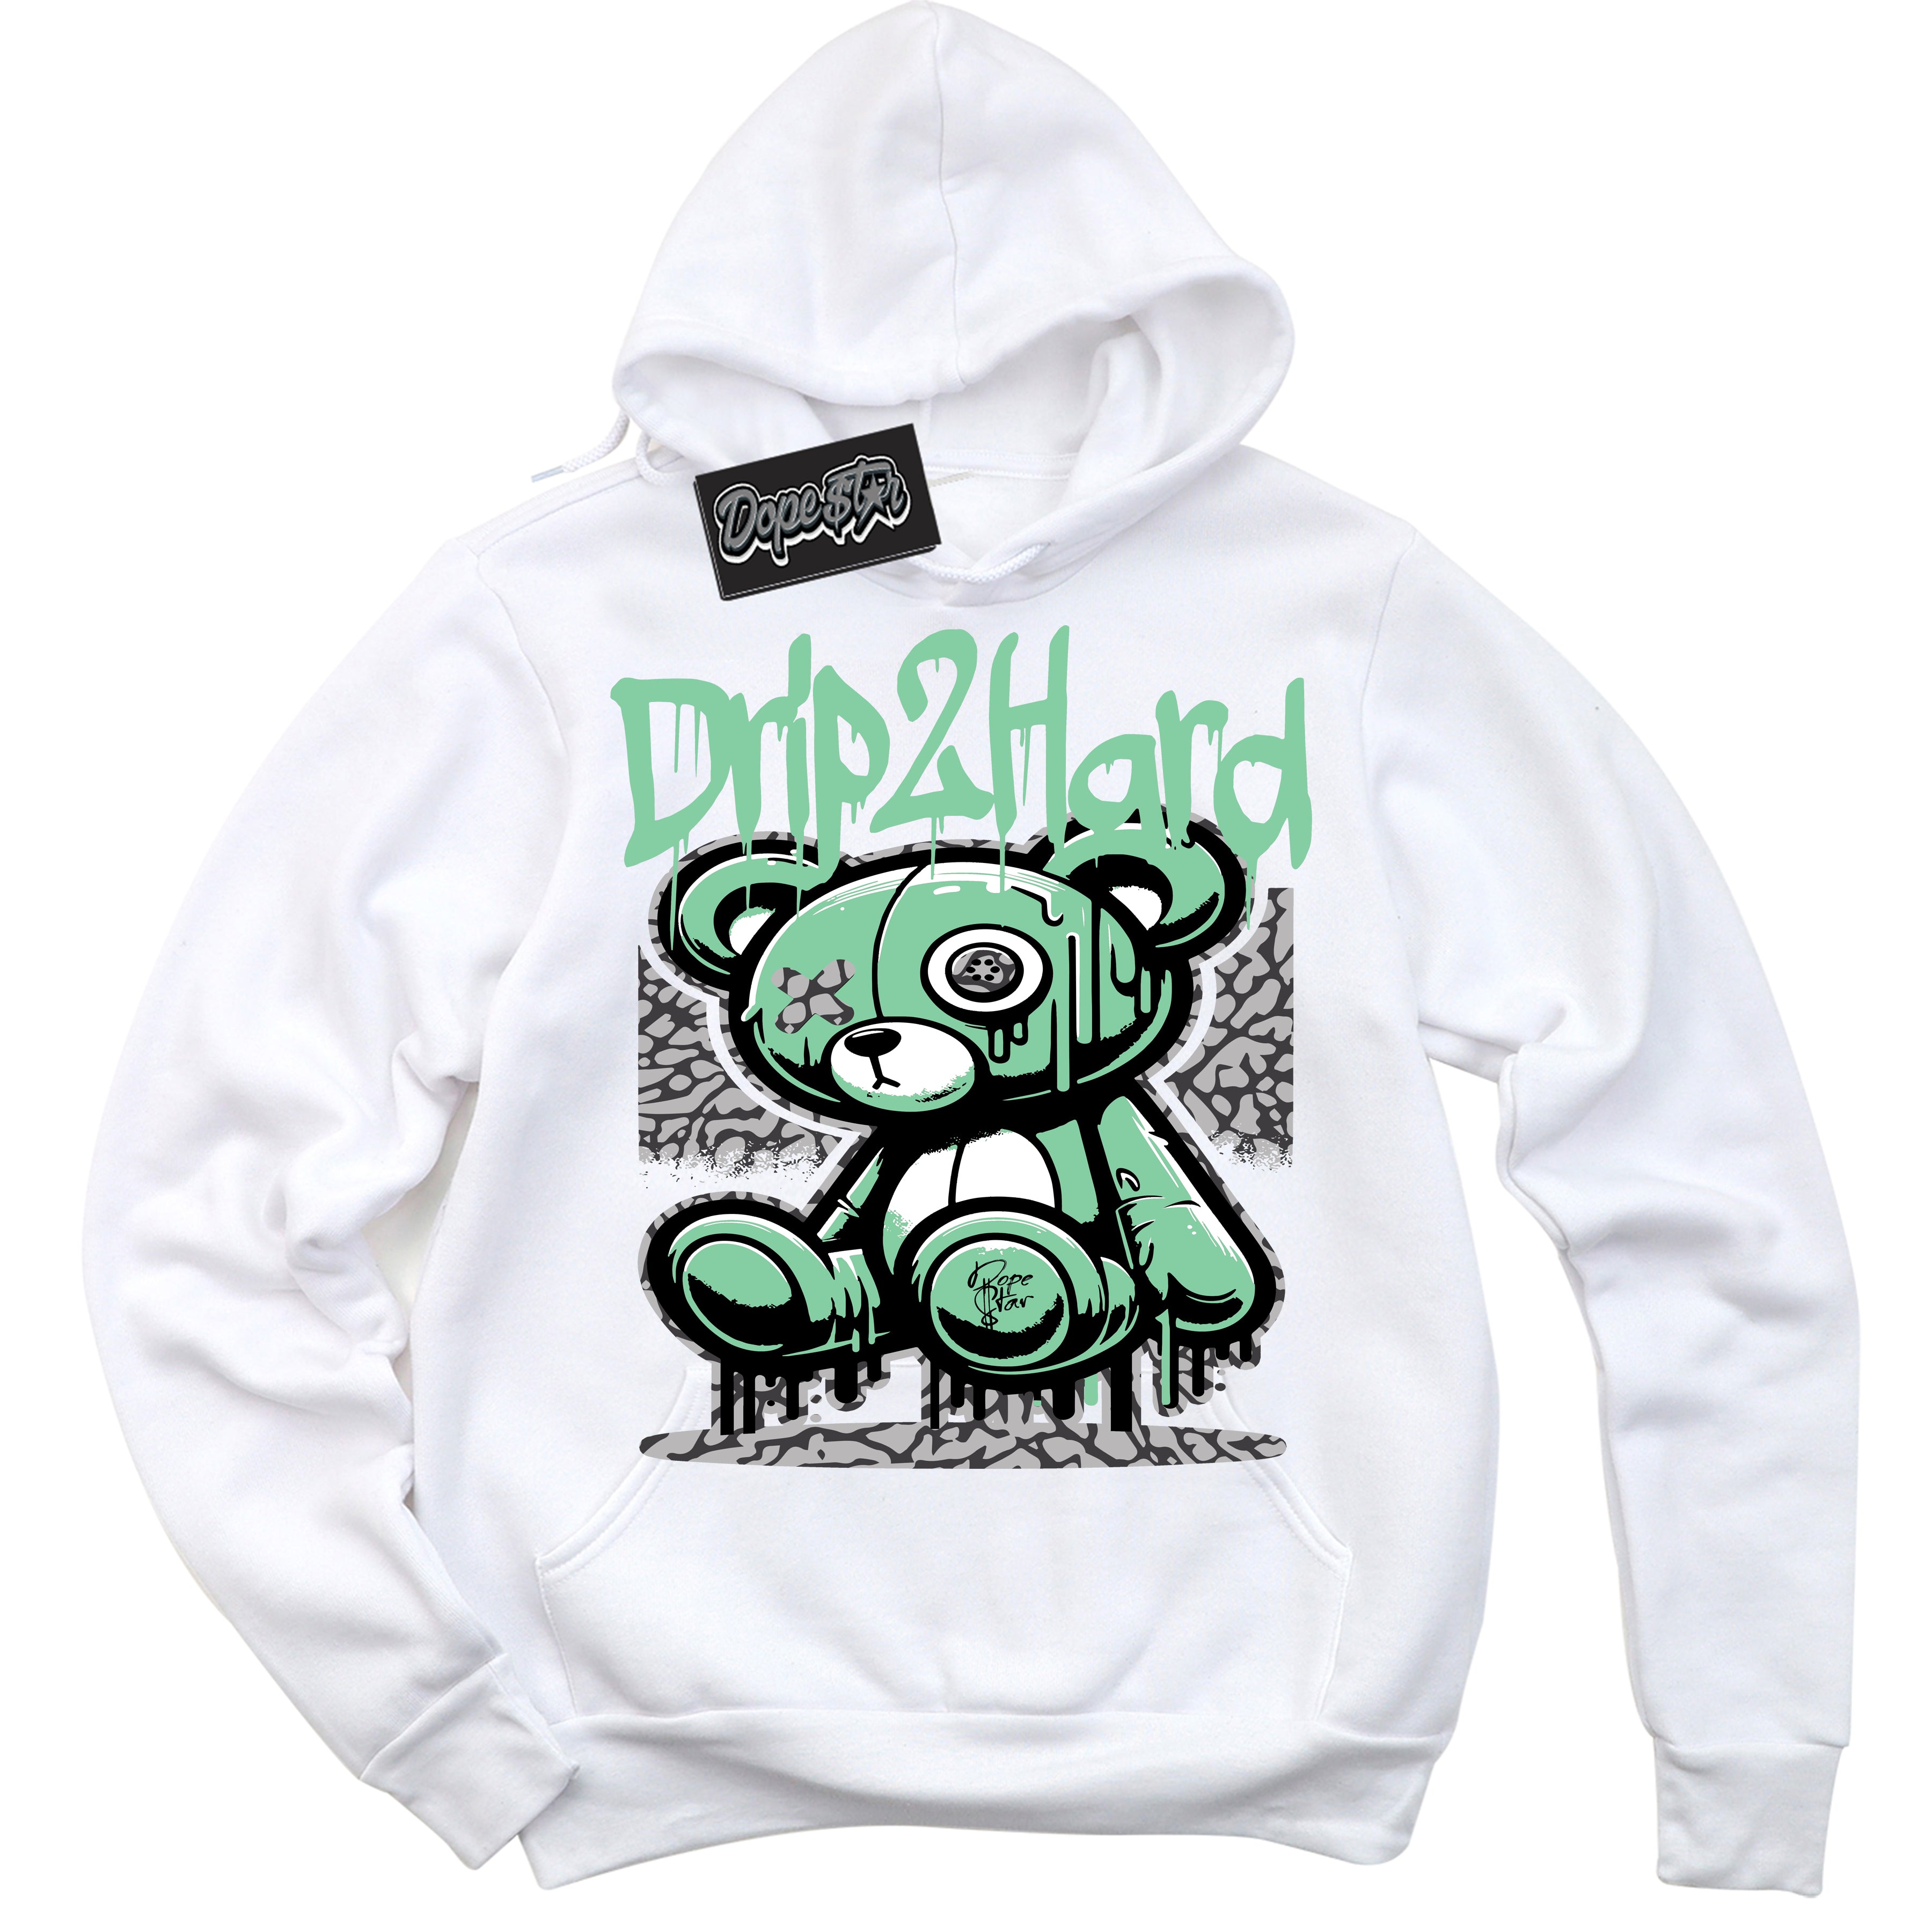 Cool White Graphic DopeStar Hoodie with “ Drip 2 Hard “ print, that perfectly matches Green Glow 3s sneakers